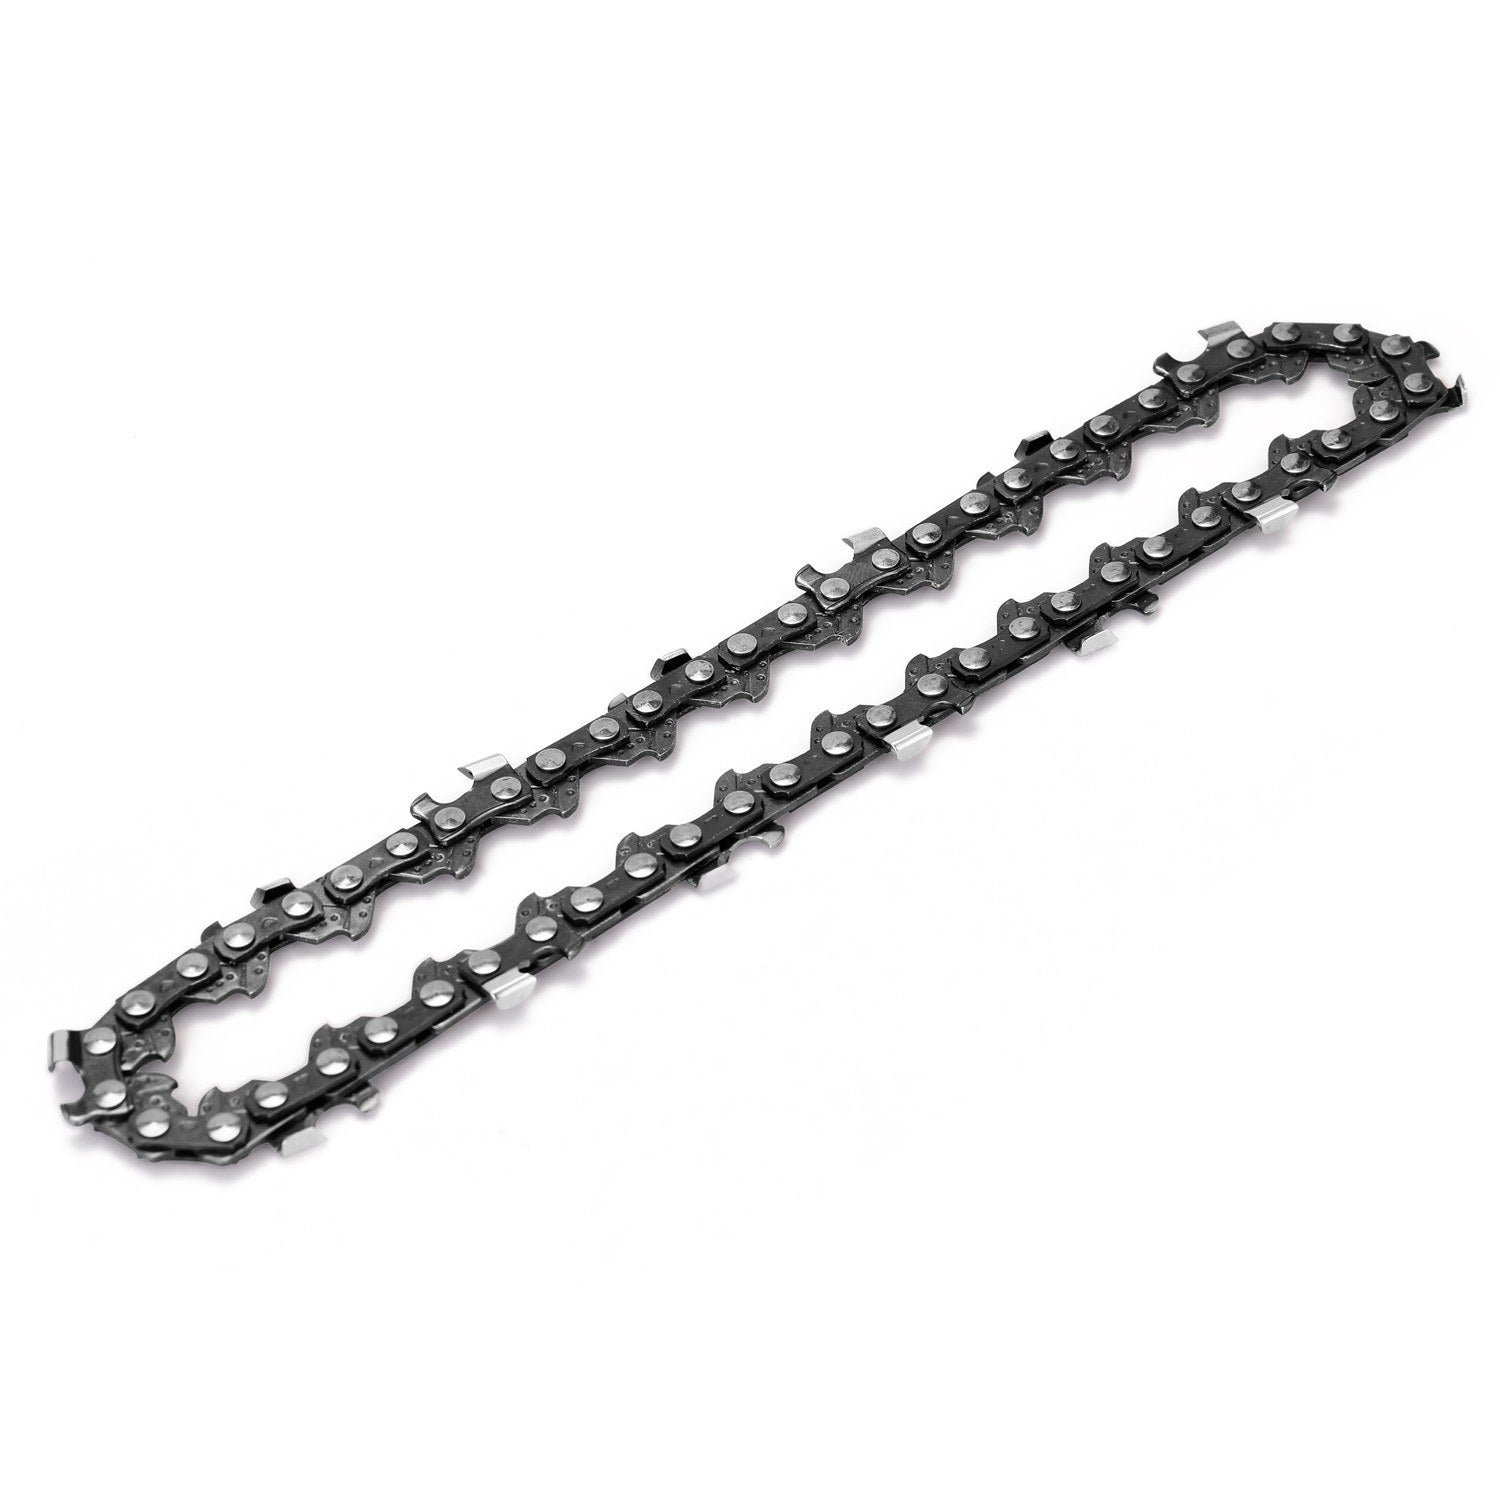 4 Inch Mini Steel Chain Chainsaw Electric Saw Replacement Accessory